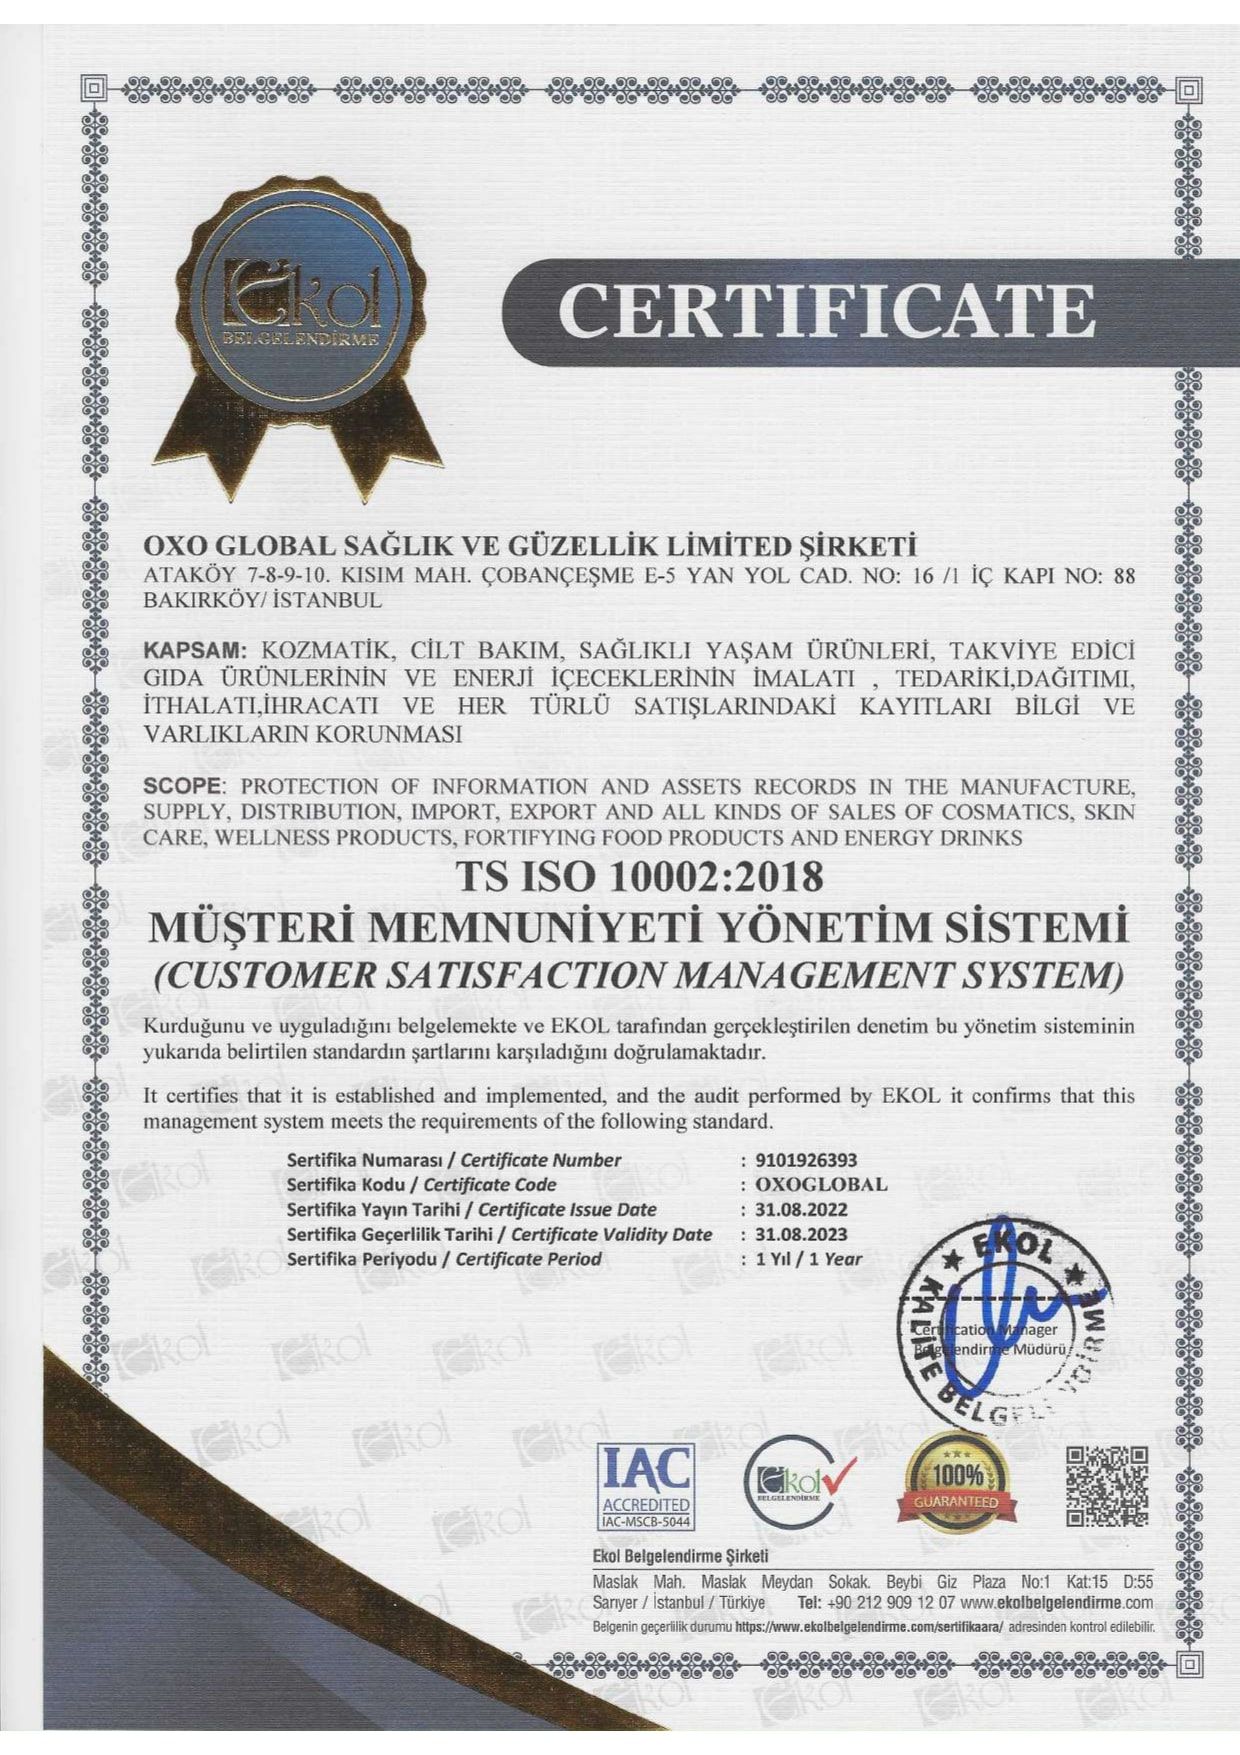 TS ISO 100022018 CUSTOMER SATISFACTION MANAGEMENT SYSTEM (CUSTOMER SATISFACTION MANAGEMENT SYSTEM)